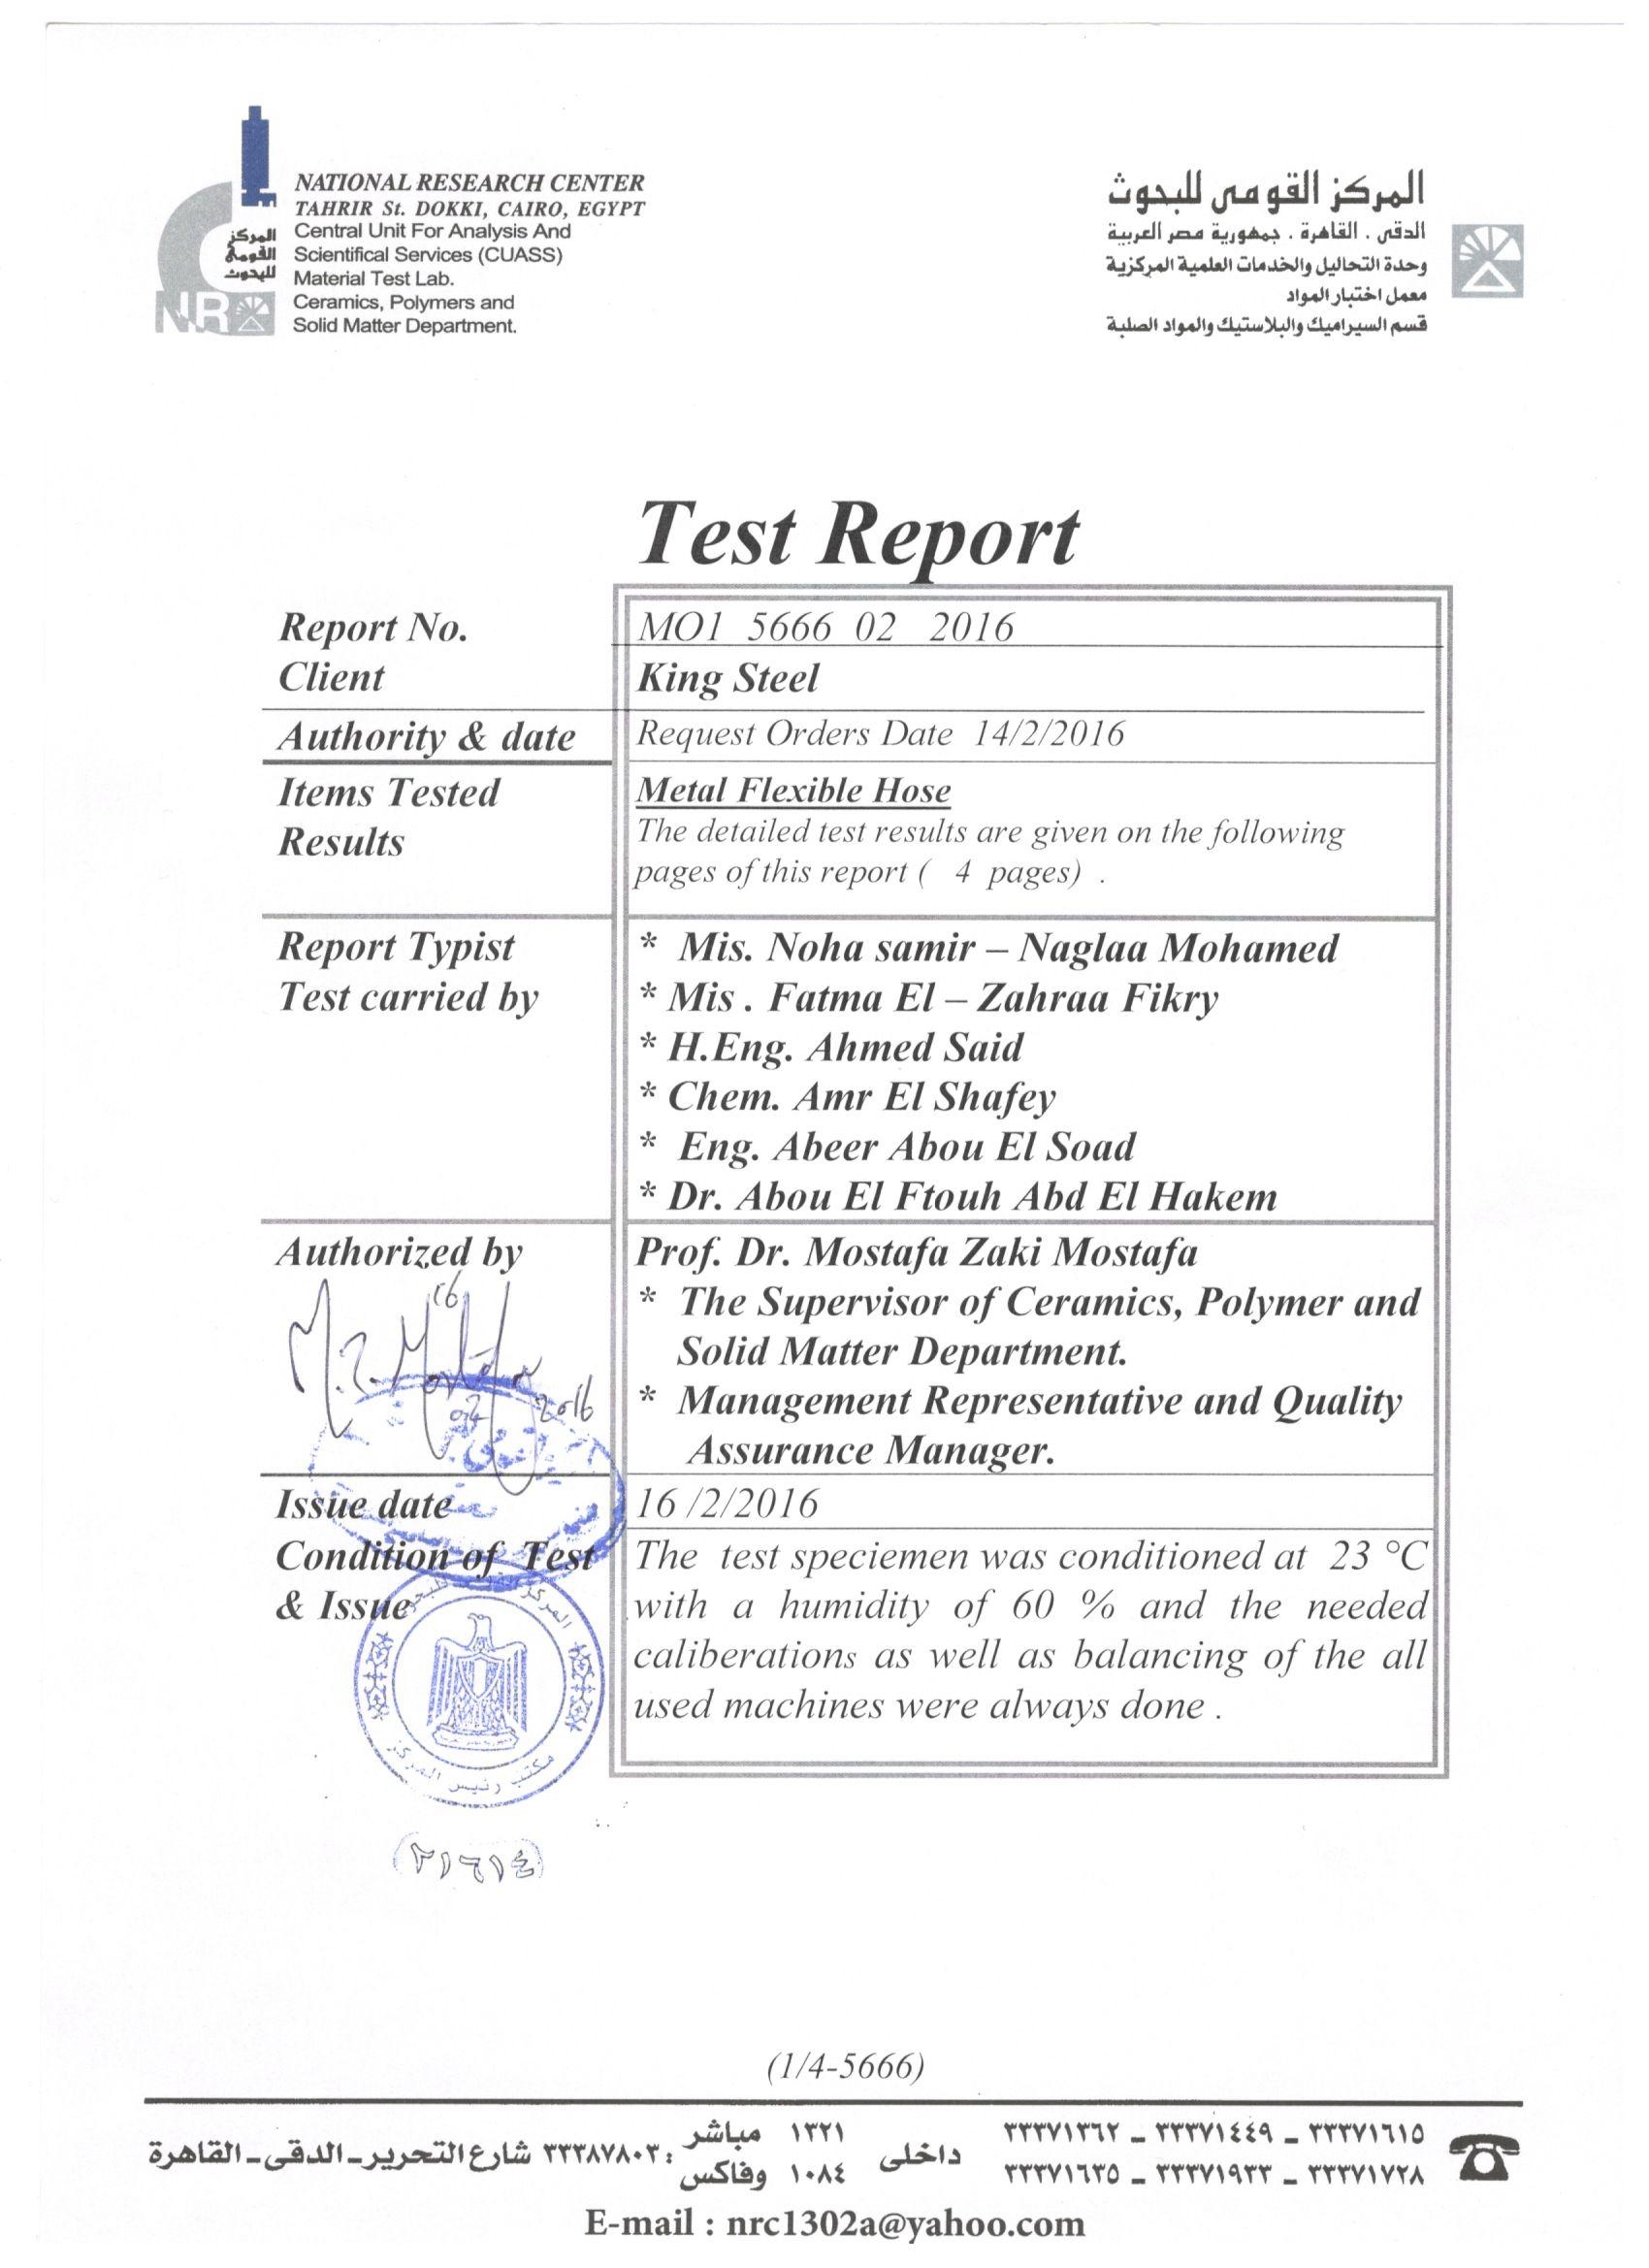 Hydrostatic Pressure Test | Kingsteel Within Hydrostatic Pressure Test Report Template